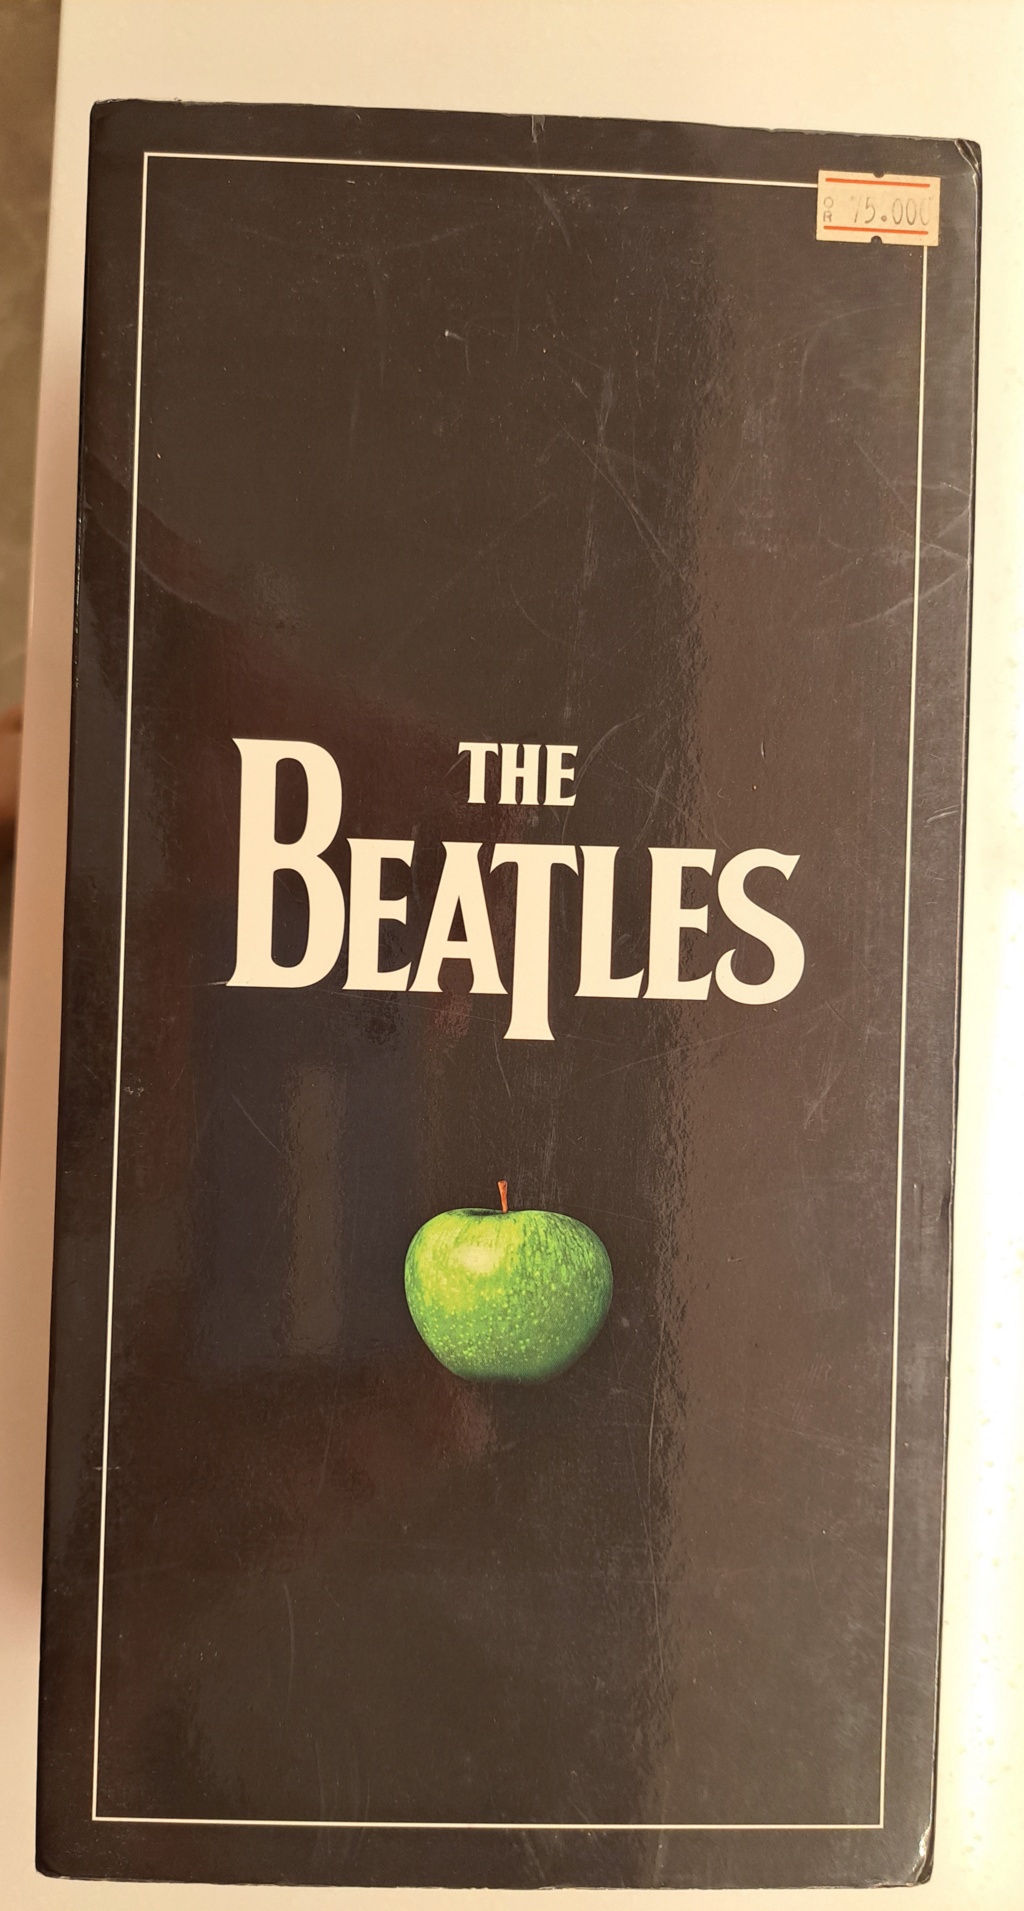 The Beatles - 17 Disc Box Set. 2009 EMI Records Remastered. Made in USA 20230369